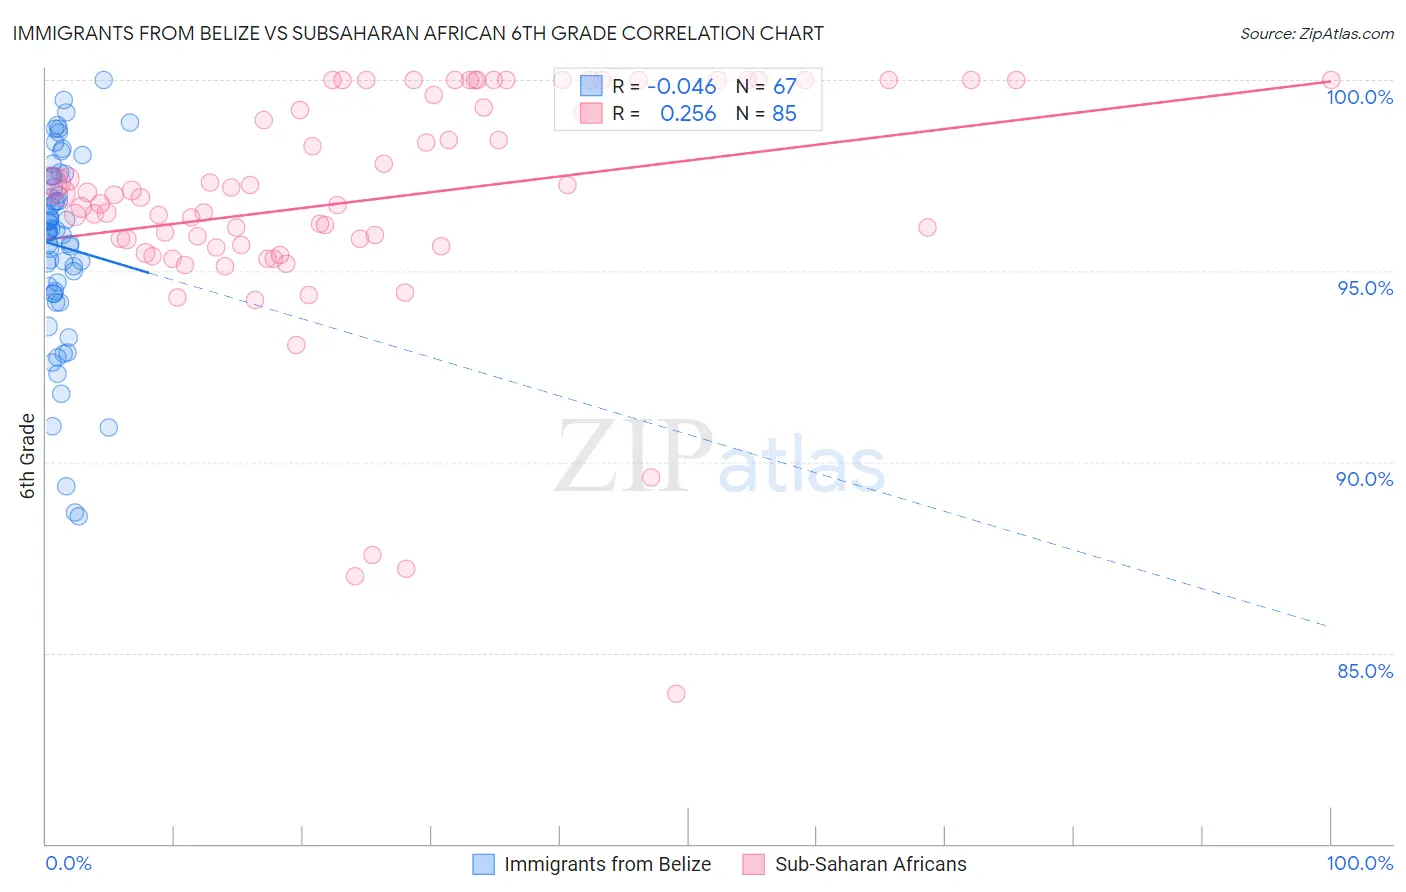 Immigrants from Belize vs Subsaharan African 6th Grade